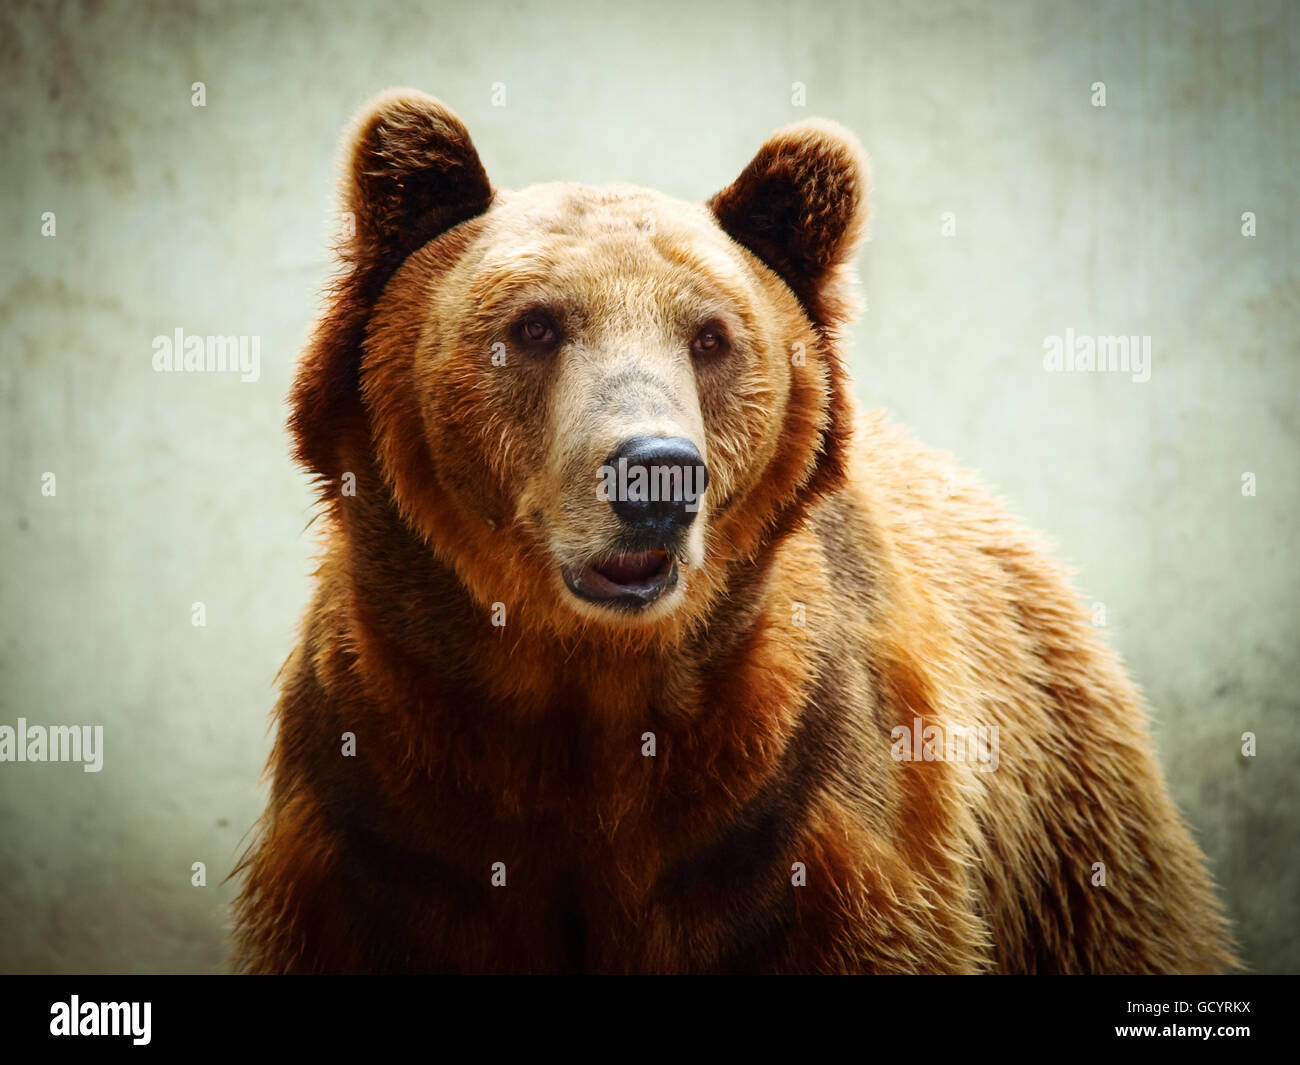 Closeup portrait of a brown bear looking at the camera Stock Photo